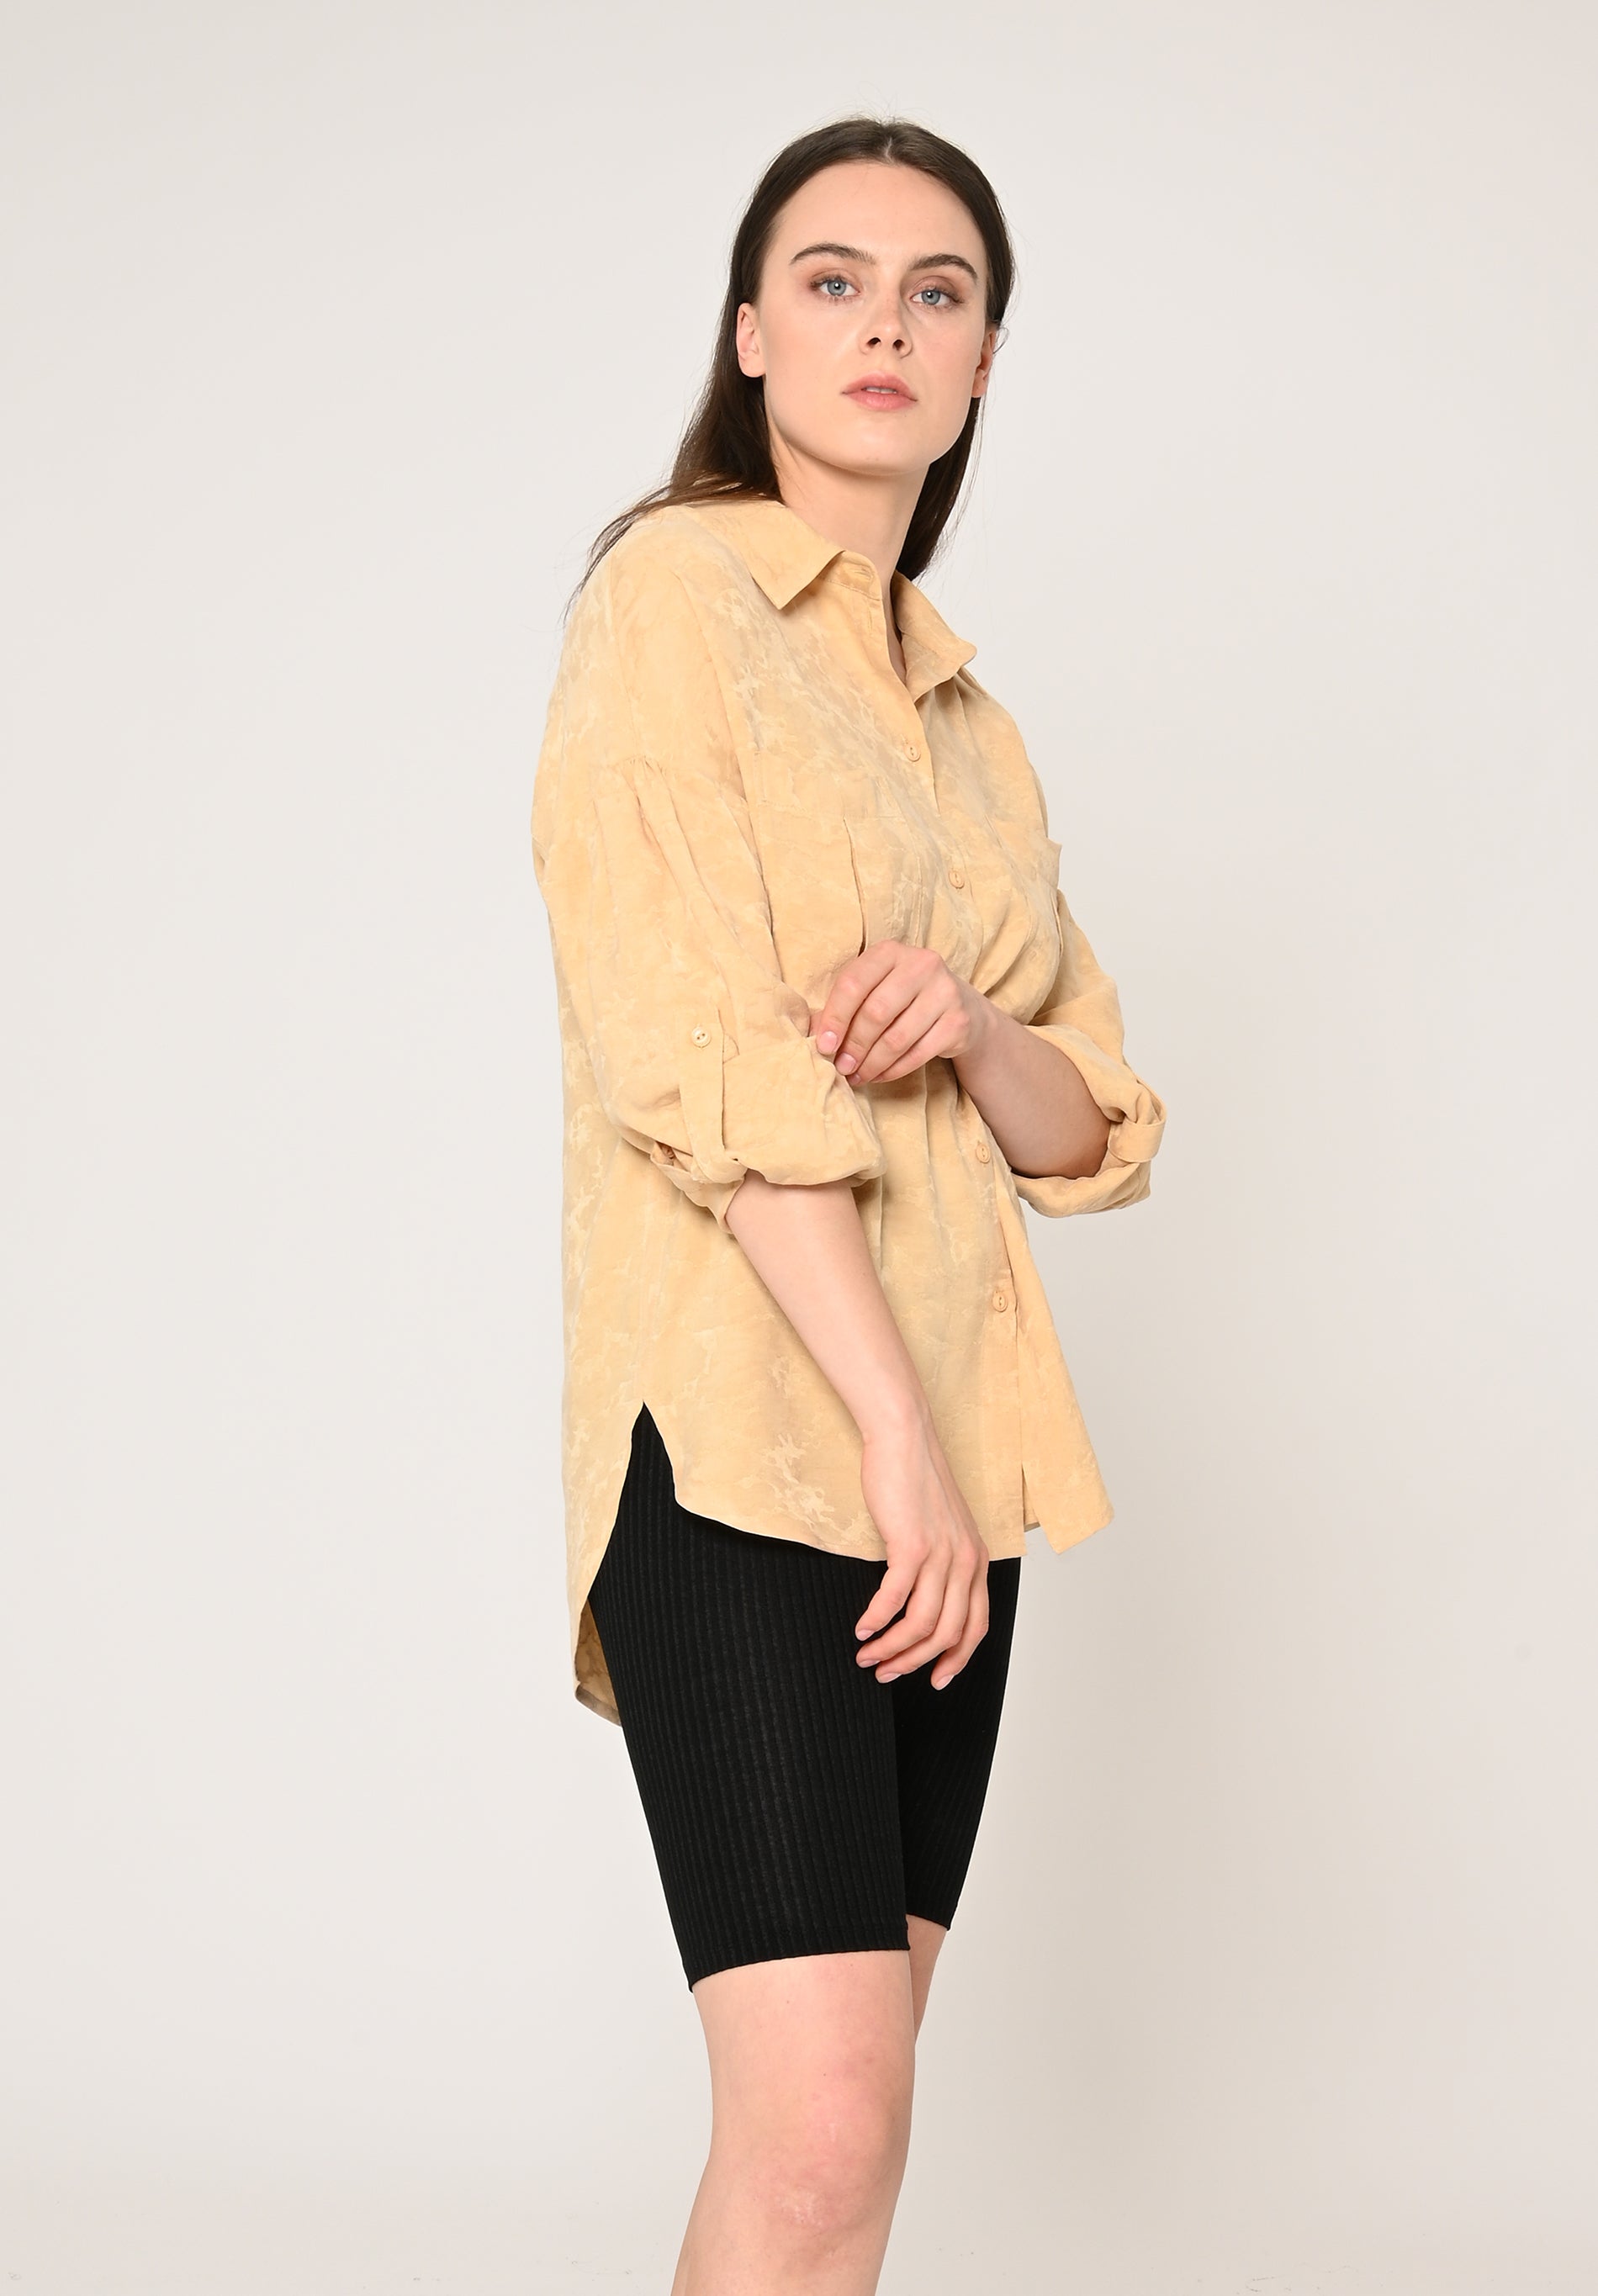 Blouse MANTARI MOIRE in cream yellow by LOVJOI made of TENCEL™